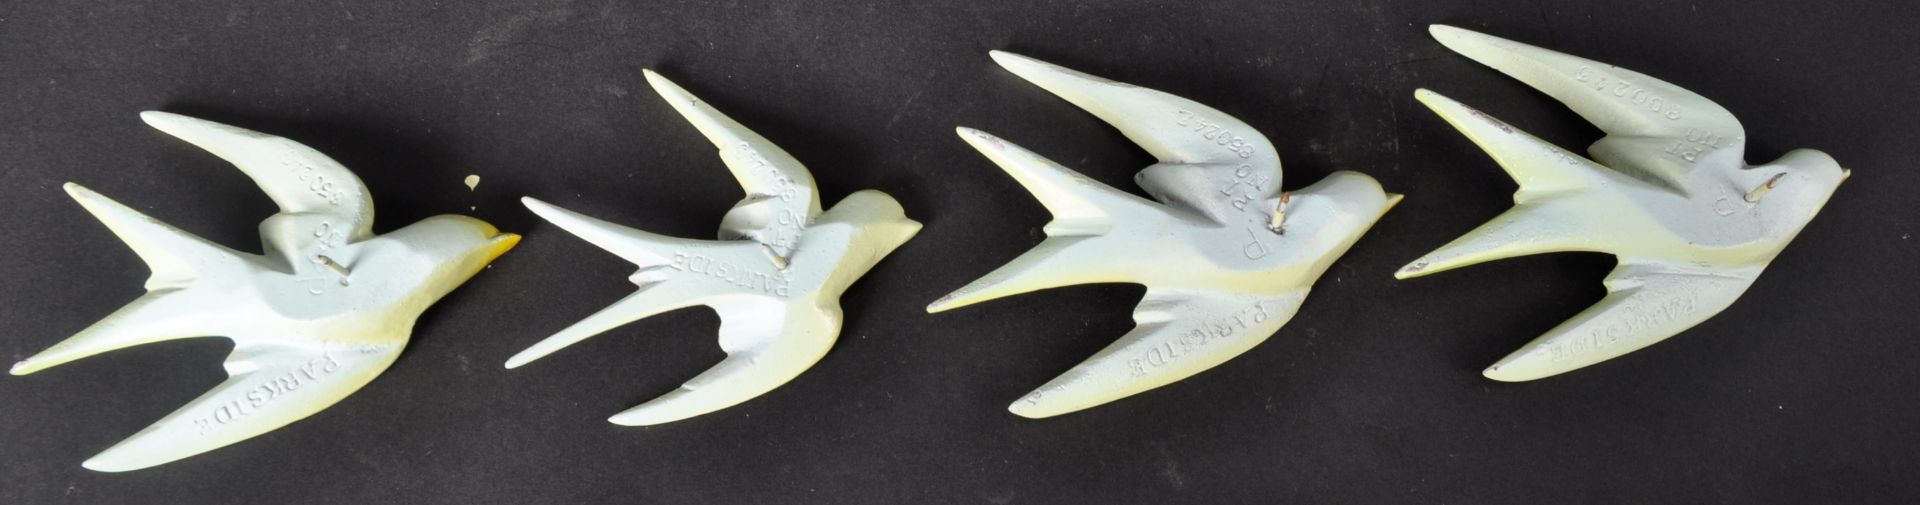 PARKSIDE - SET OF FOUR ART DECO GRADUATING SWALLOWS - Image 6 of 8